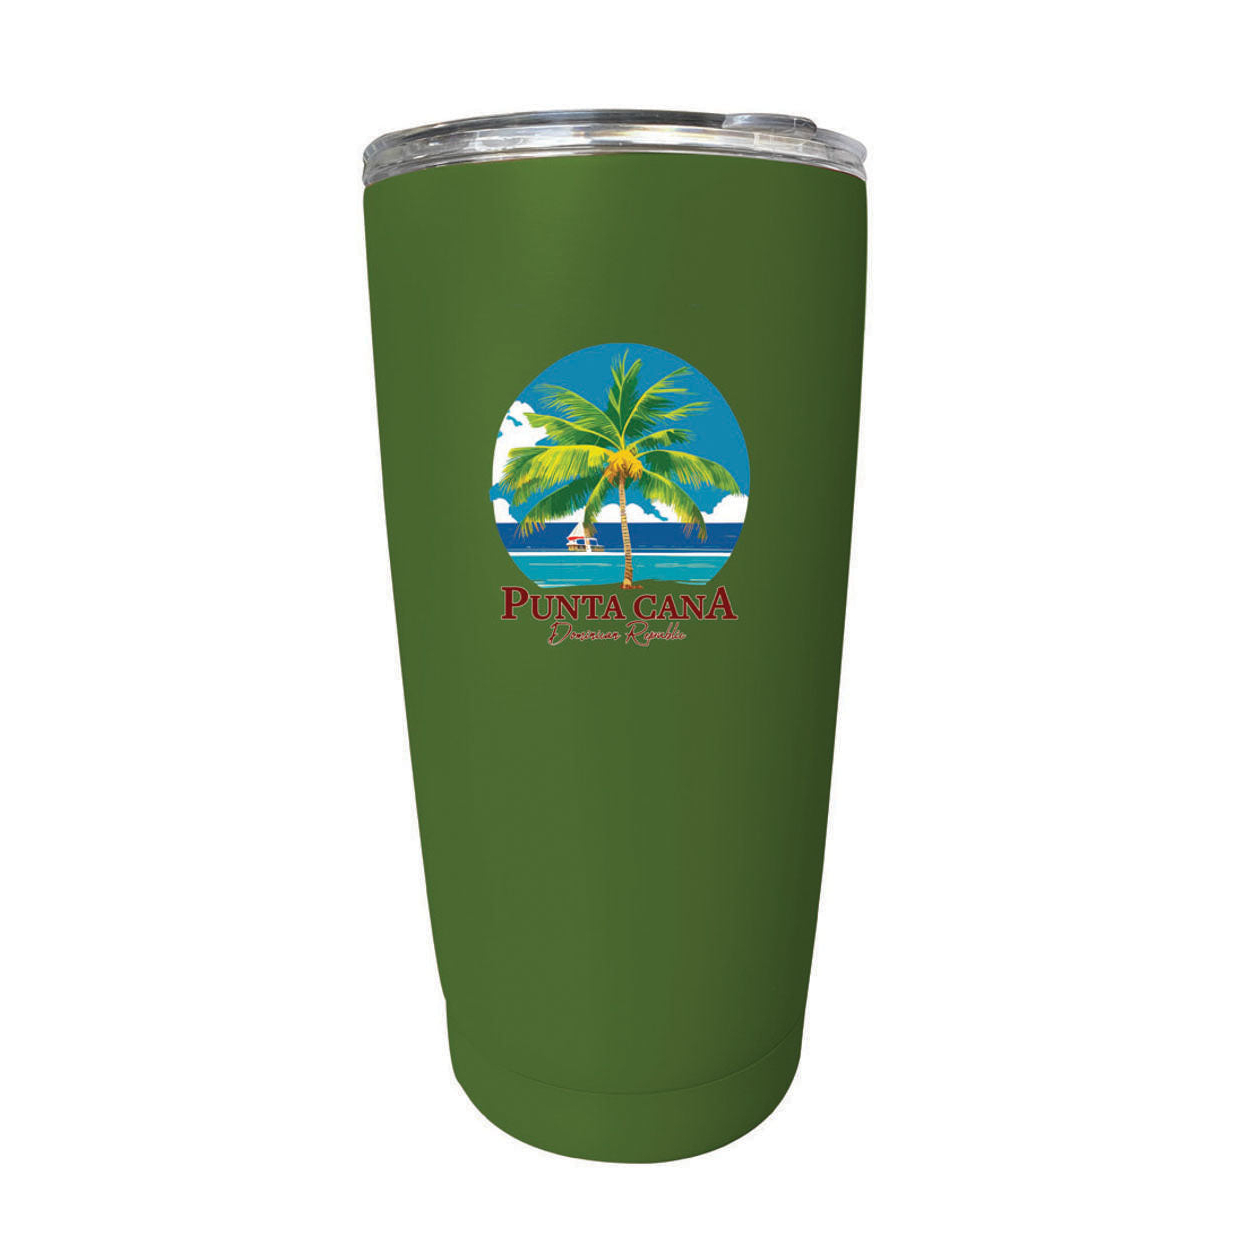 Punta Cana Dominican Republic Souvenir 16 Oz Stainless Steel Insulated Tumbler - Green, PARROT